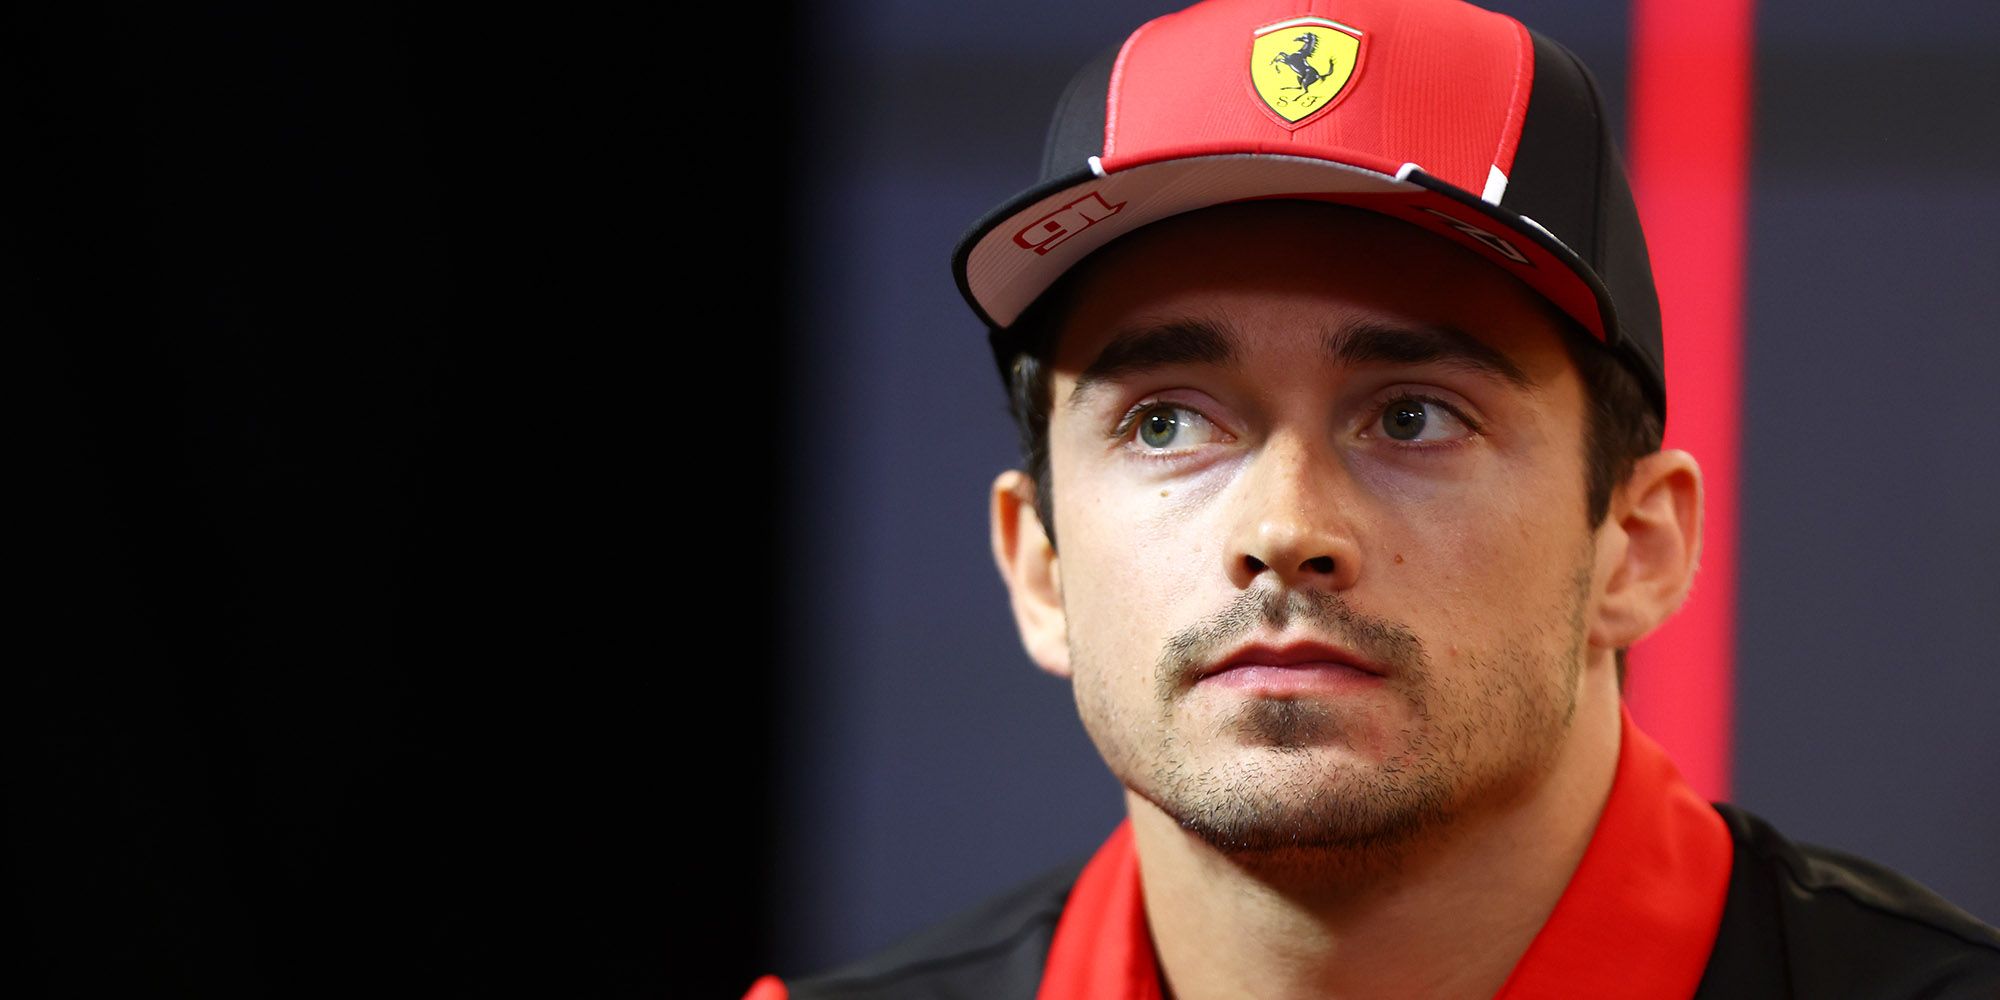 Leclerc to Fans: Please Stop Showing Up at My Door